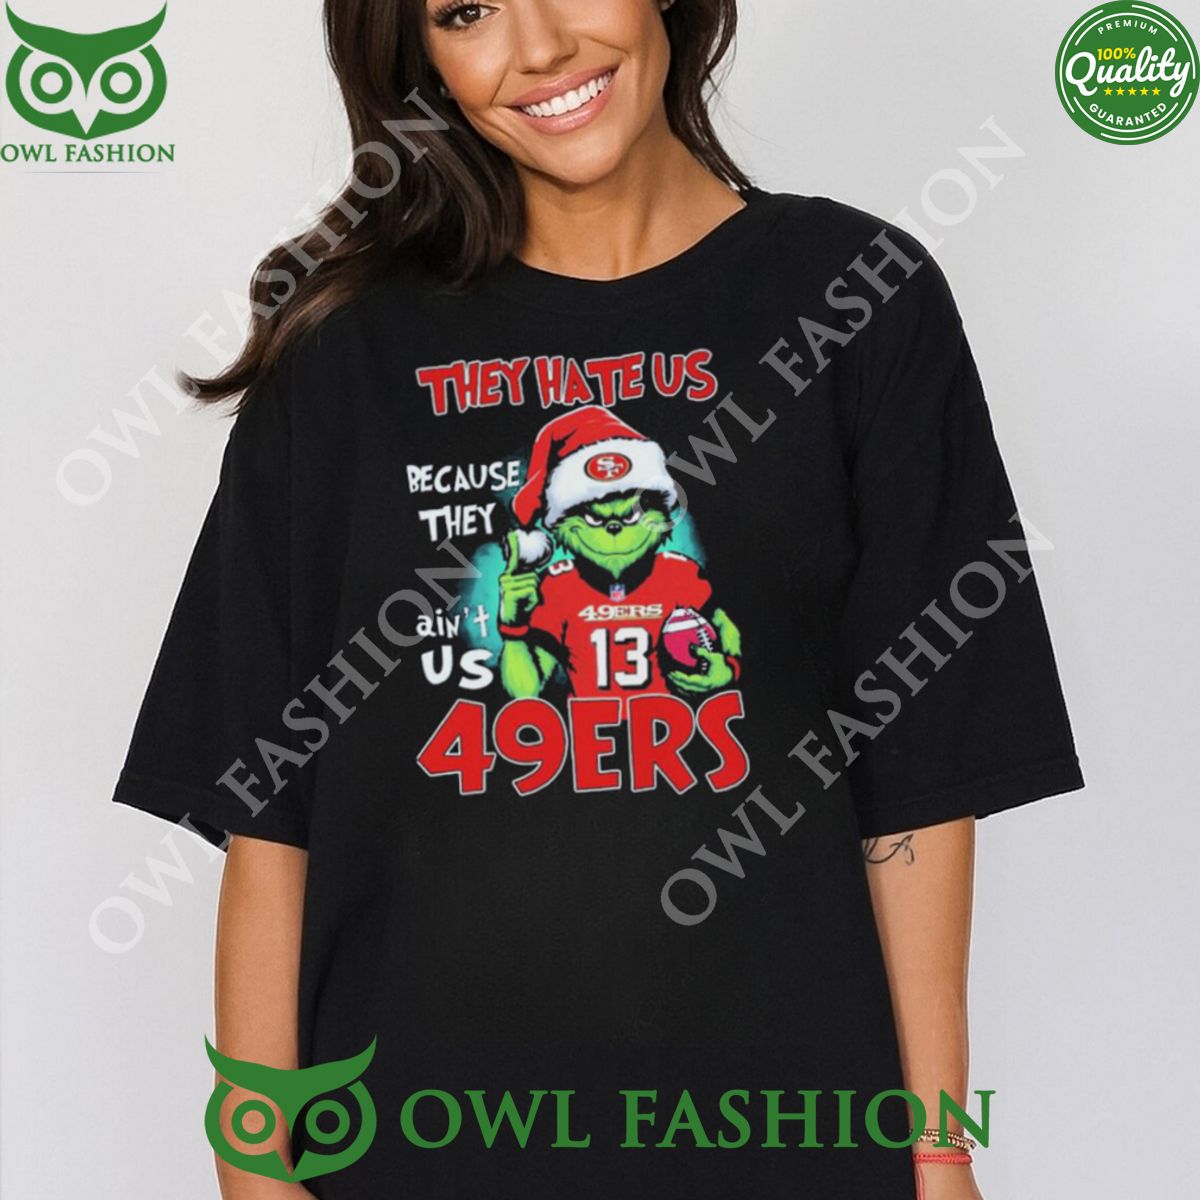 They Hate Us Because Ain’t Us San Francisco 49ers The Grinch Christmas T-Shirt 